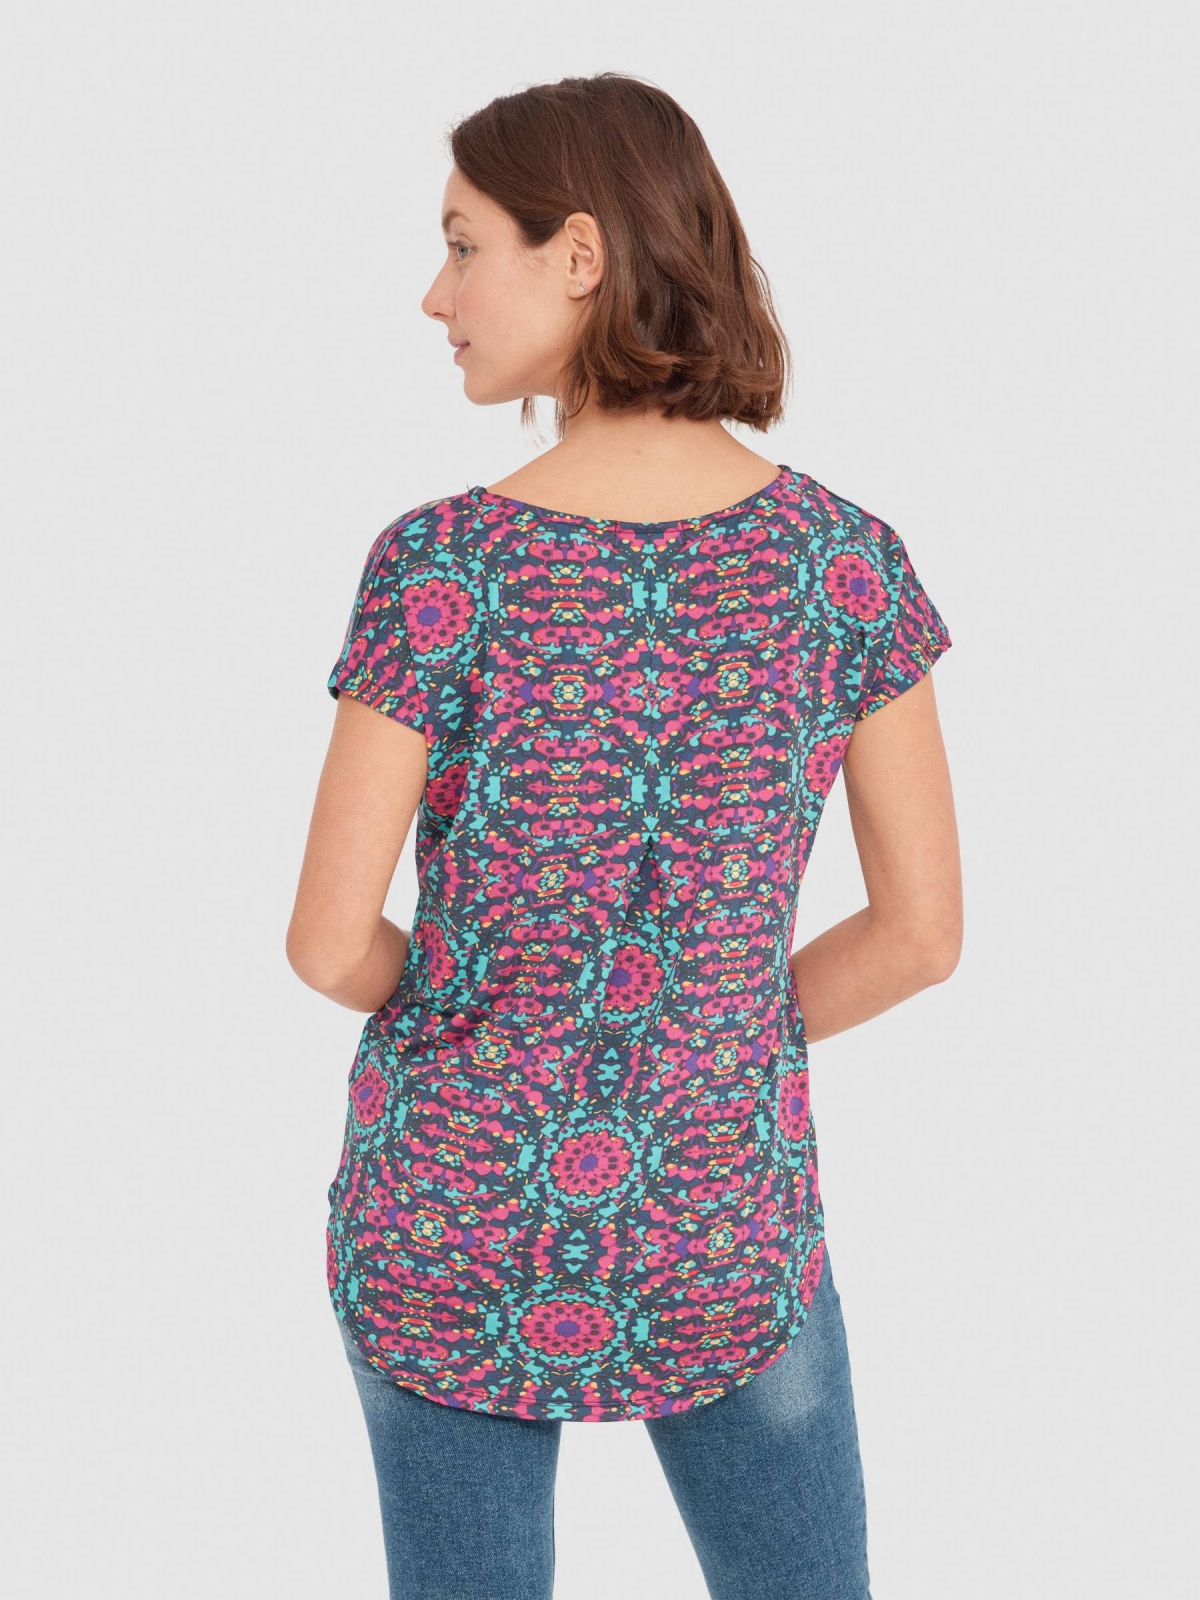 Abstract print fluid t-shirt multicolor middle back view